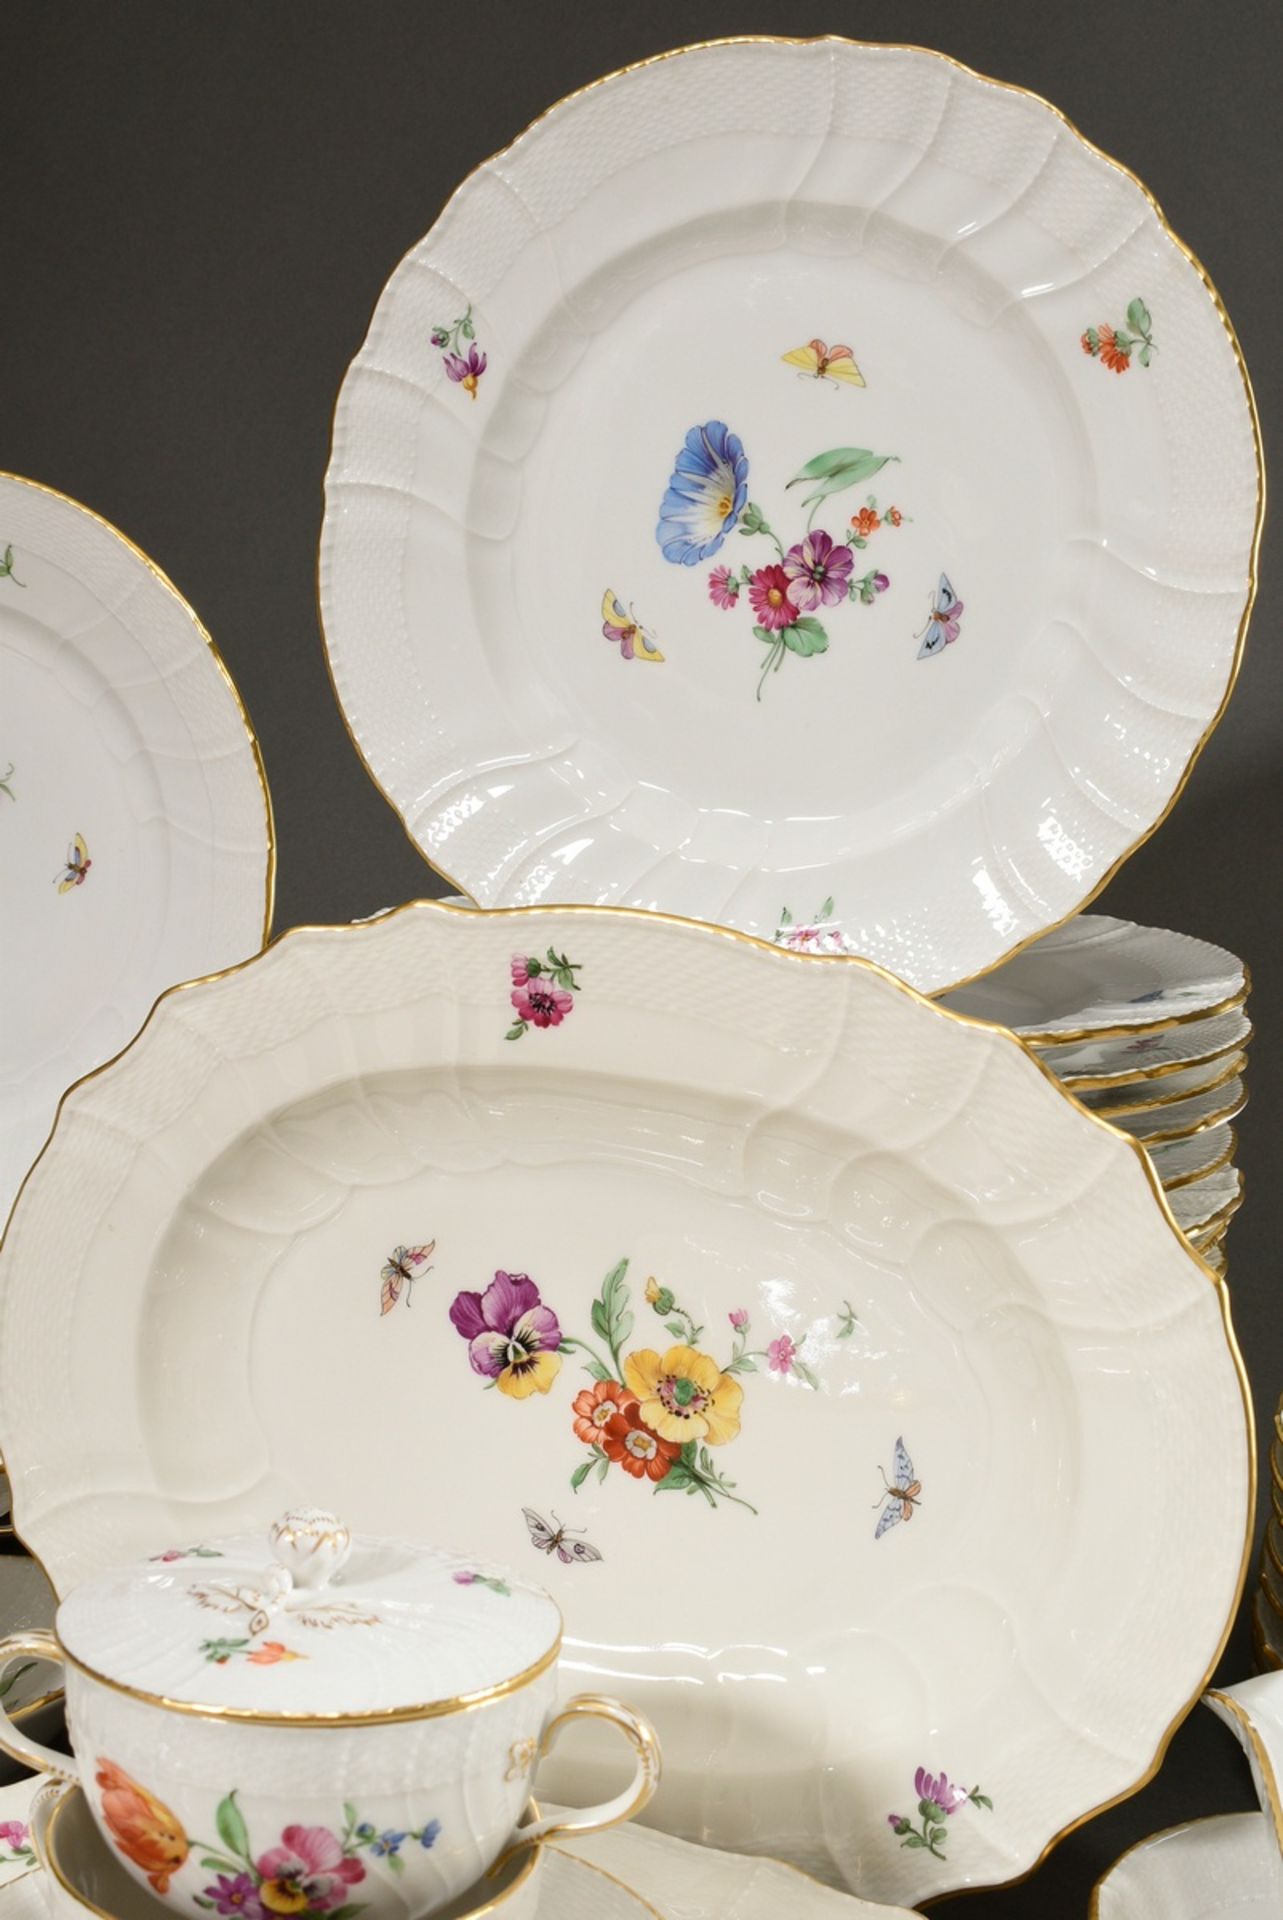 114 pieces KPM dinner service "Neuosier" with polychrome painting "flowers and insects" consisting  - Image 9 of 14